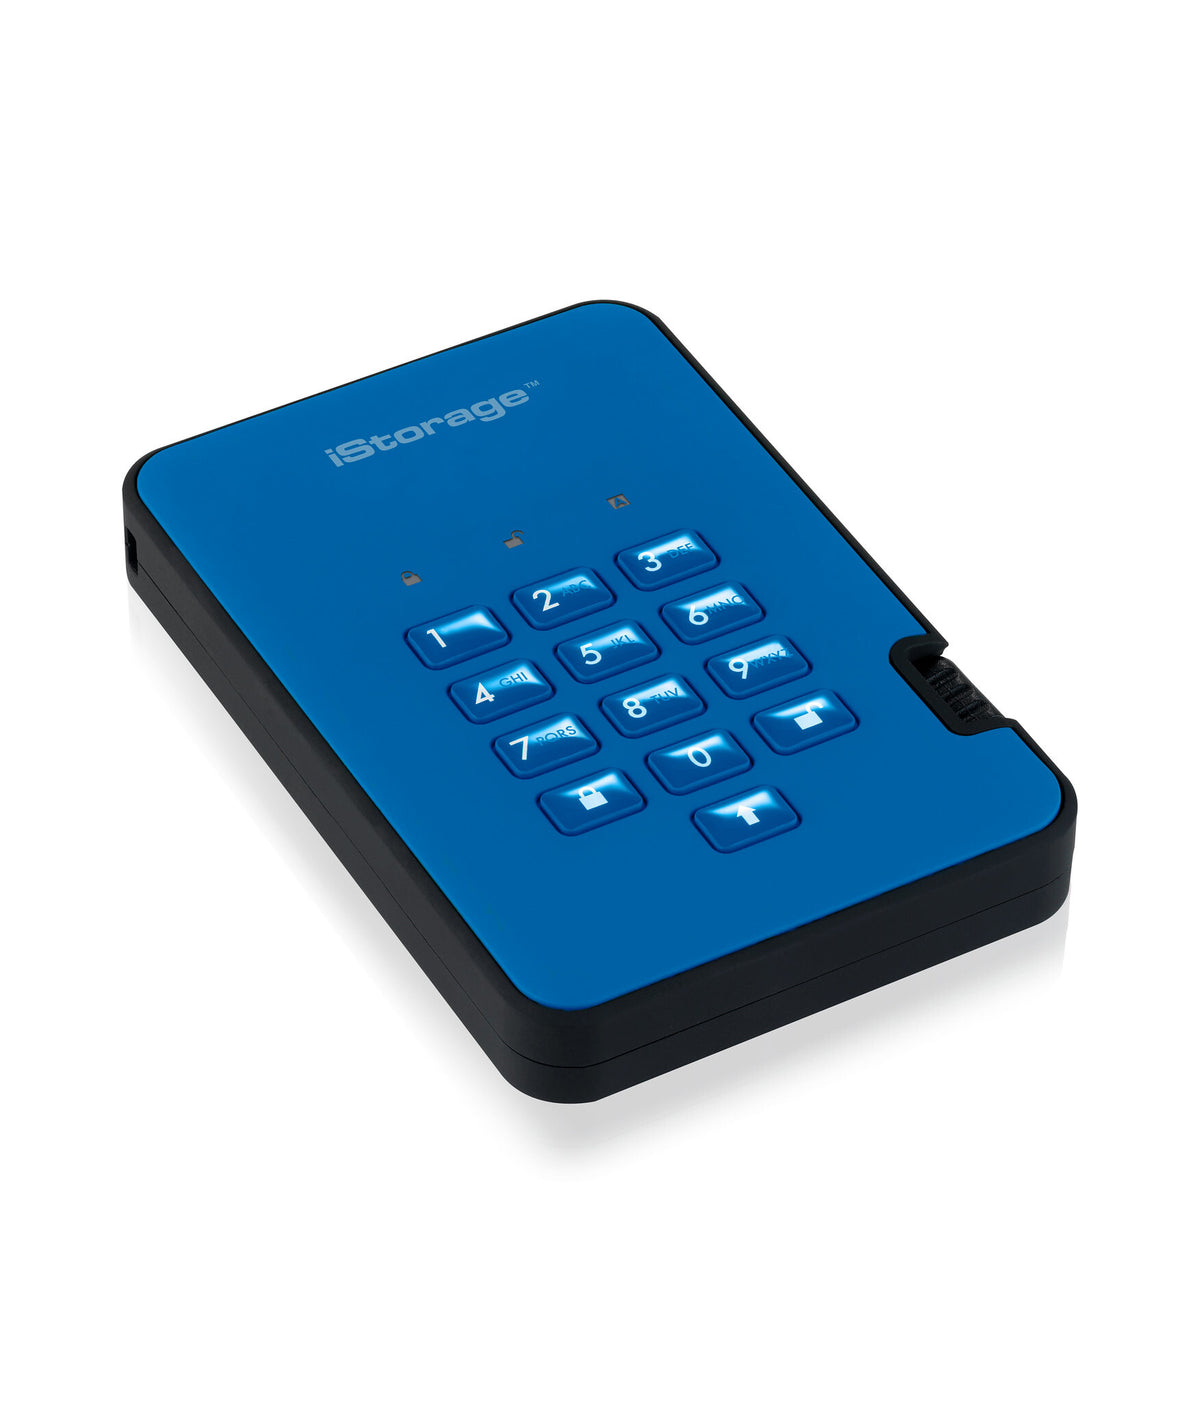 iStorage diskAshur2 - Secure Encrypted External solid state drive in Blue - 256 GB